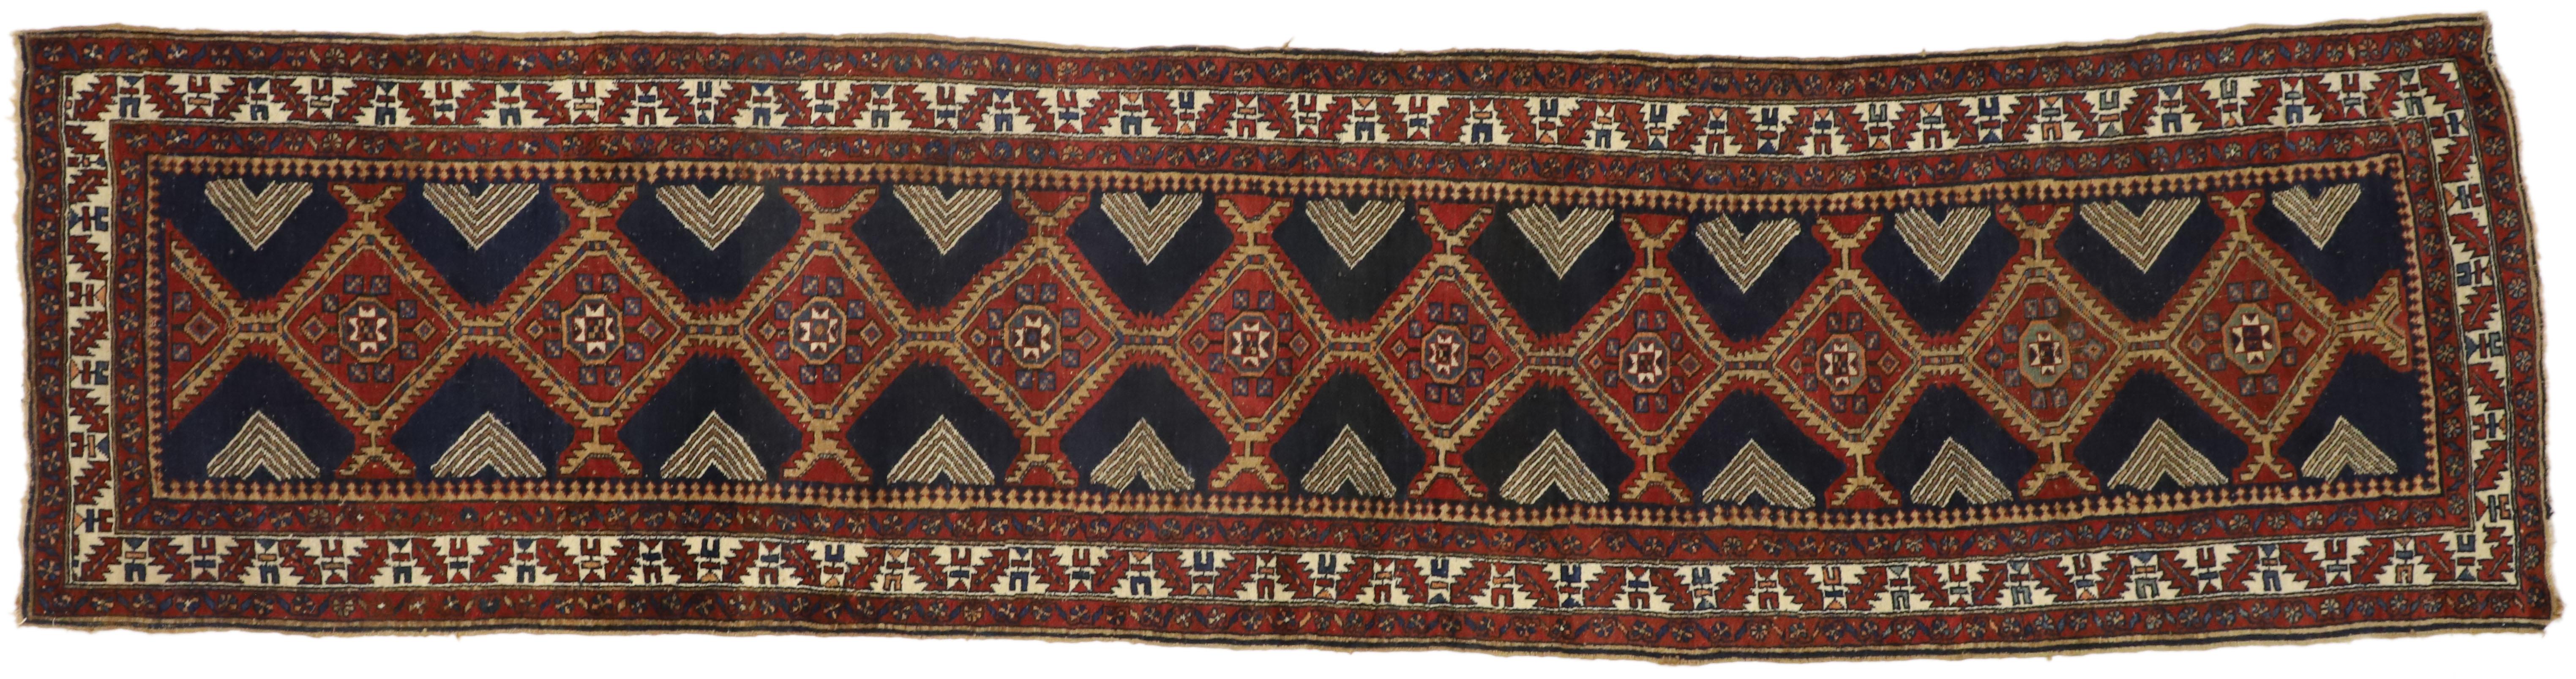 Vintage Persian Heriz Runner with Mid-Century Modern Style For Sale 2